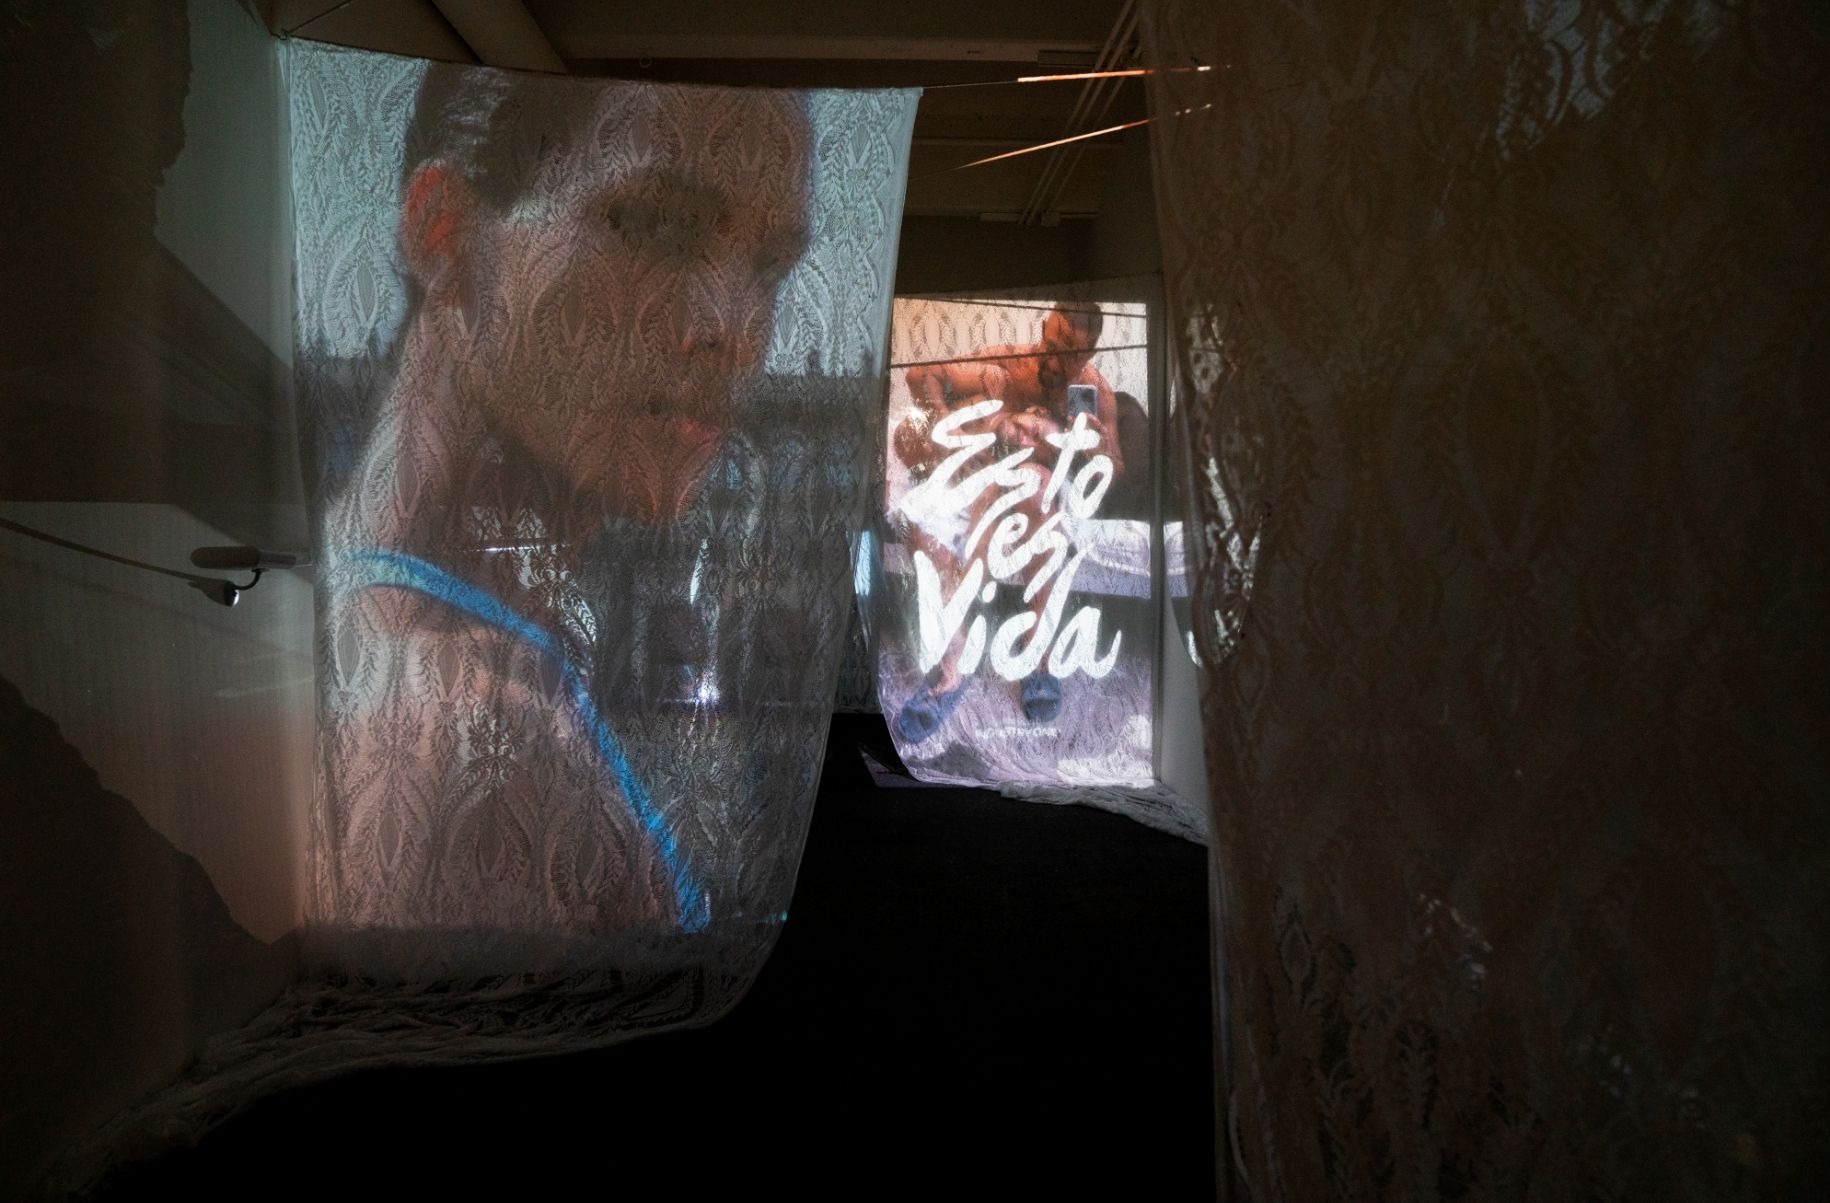 Projection room showing Dorian's work projected onto sheer fabric